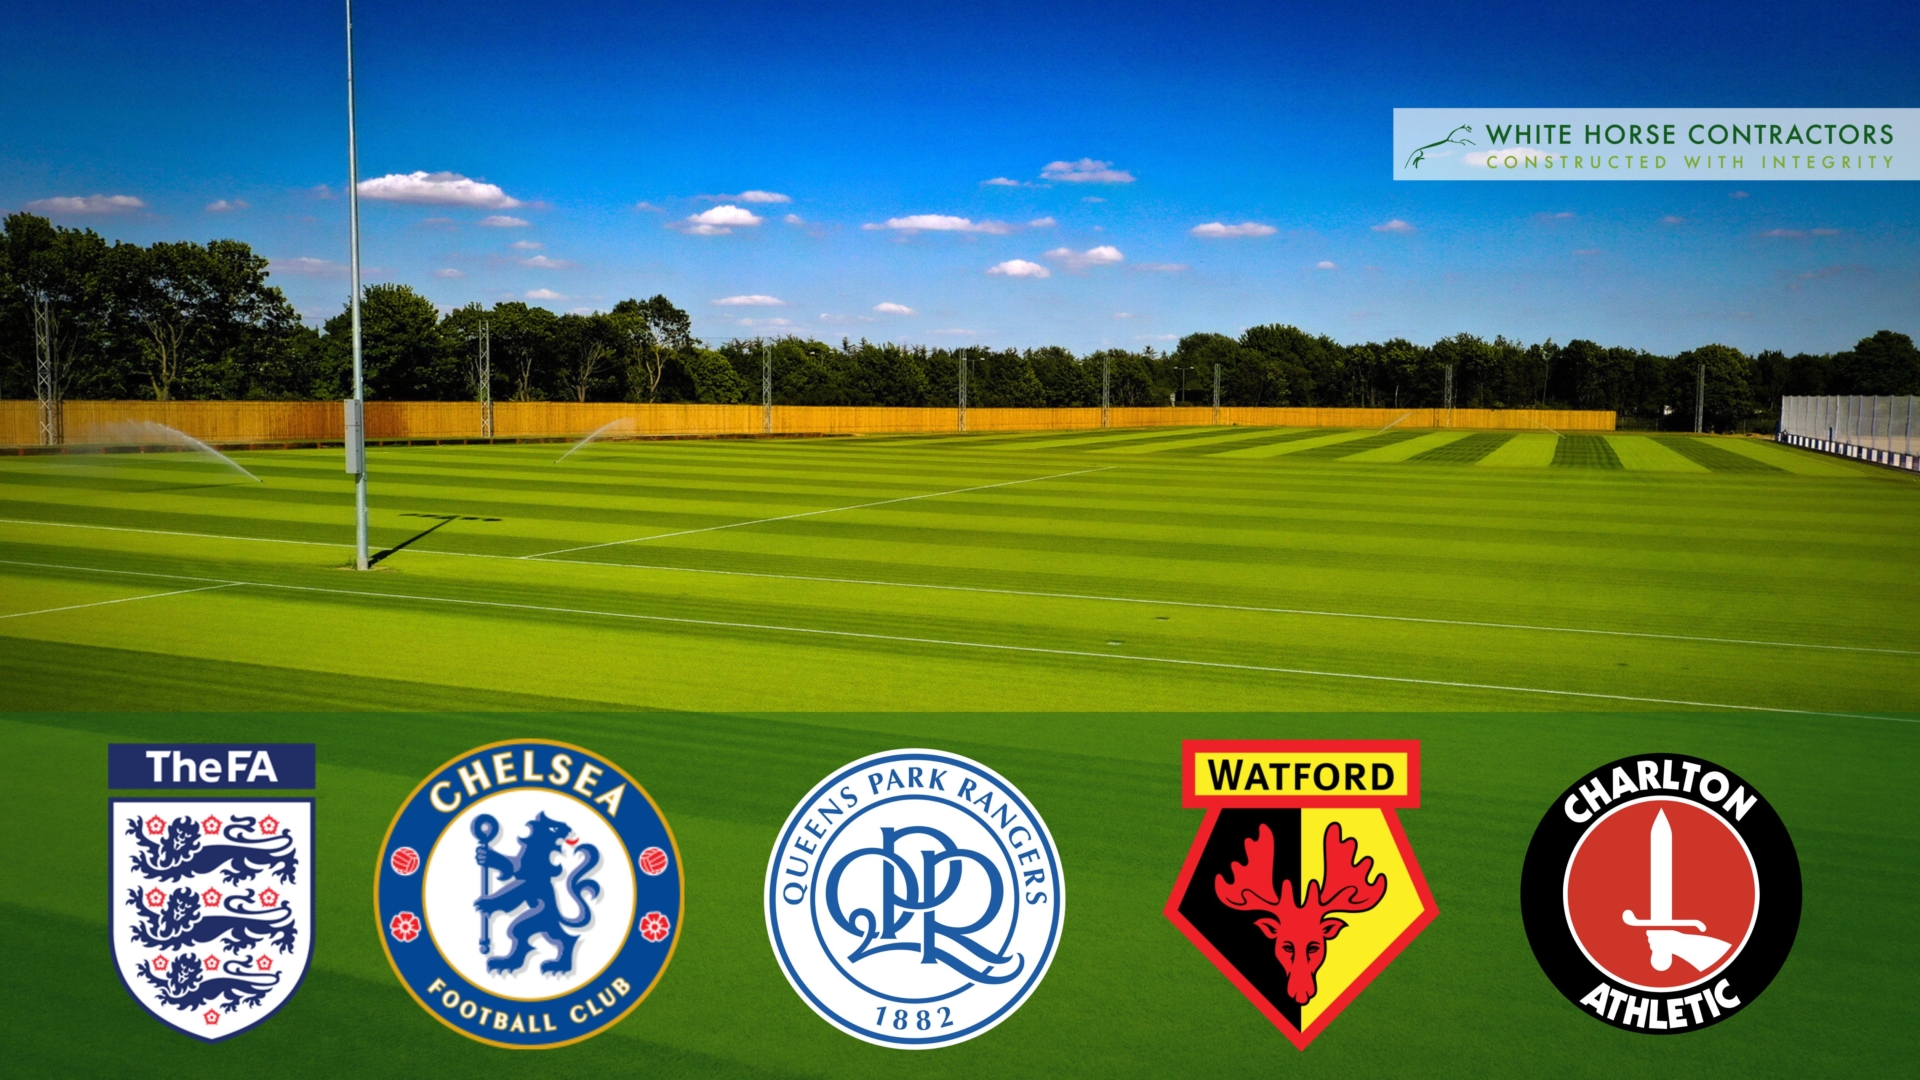 Training ground with logos of the Football Association, Chelsea F.C., Portsmouth F.C., Queens Park Rangers F.C., Watford F.C., Charlton Athletic F.C.